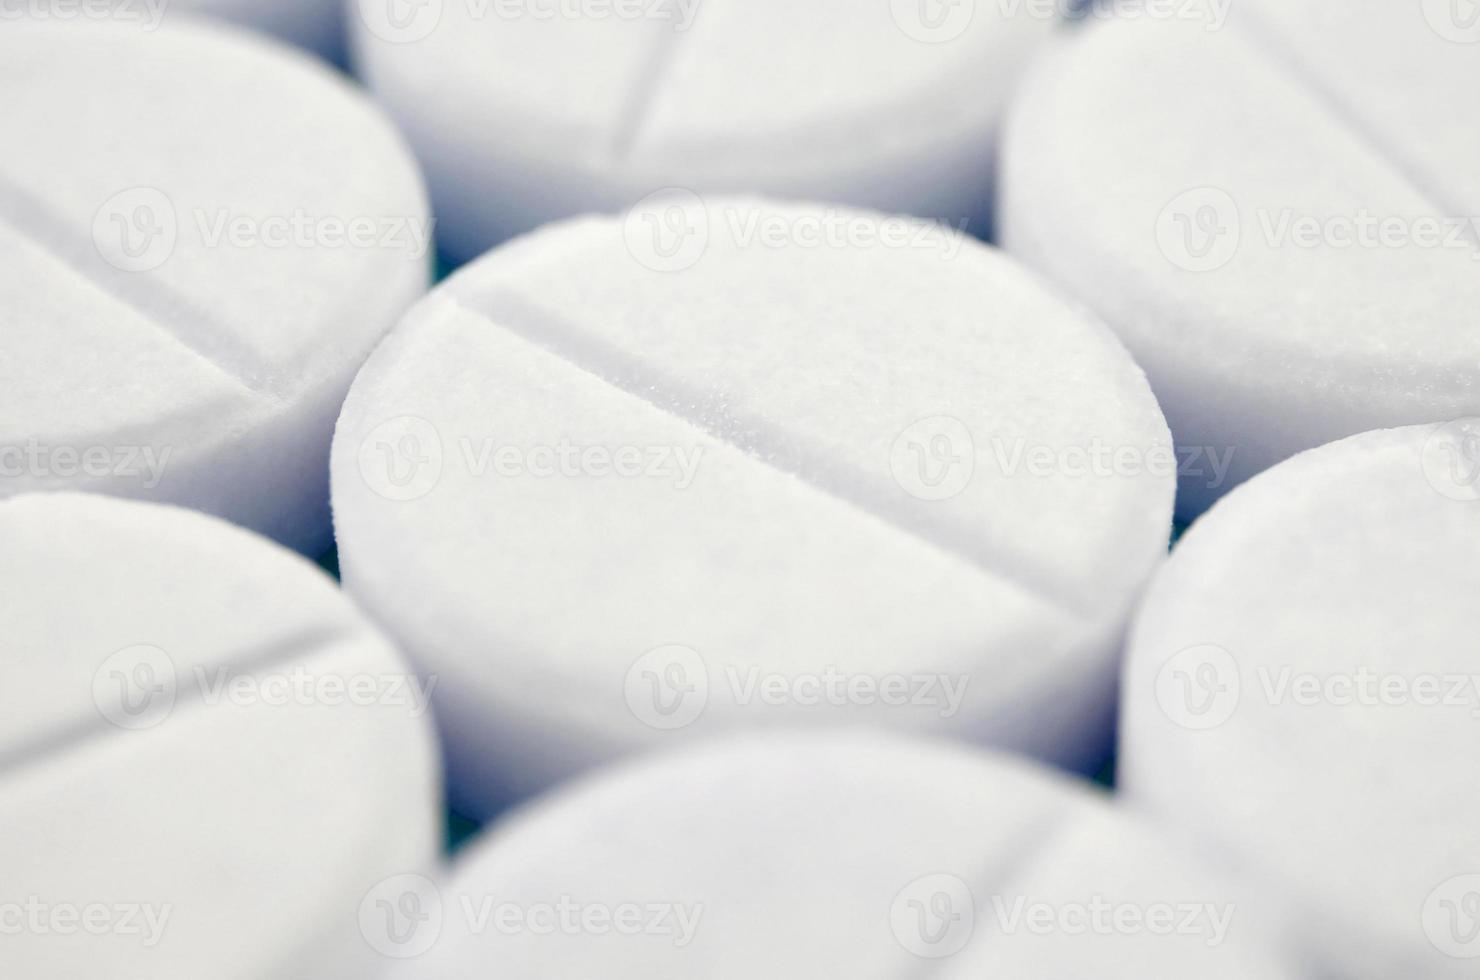 Close-up image of white pills. Macro with extremely shallow depth of field photo